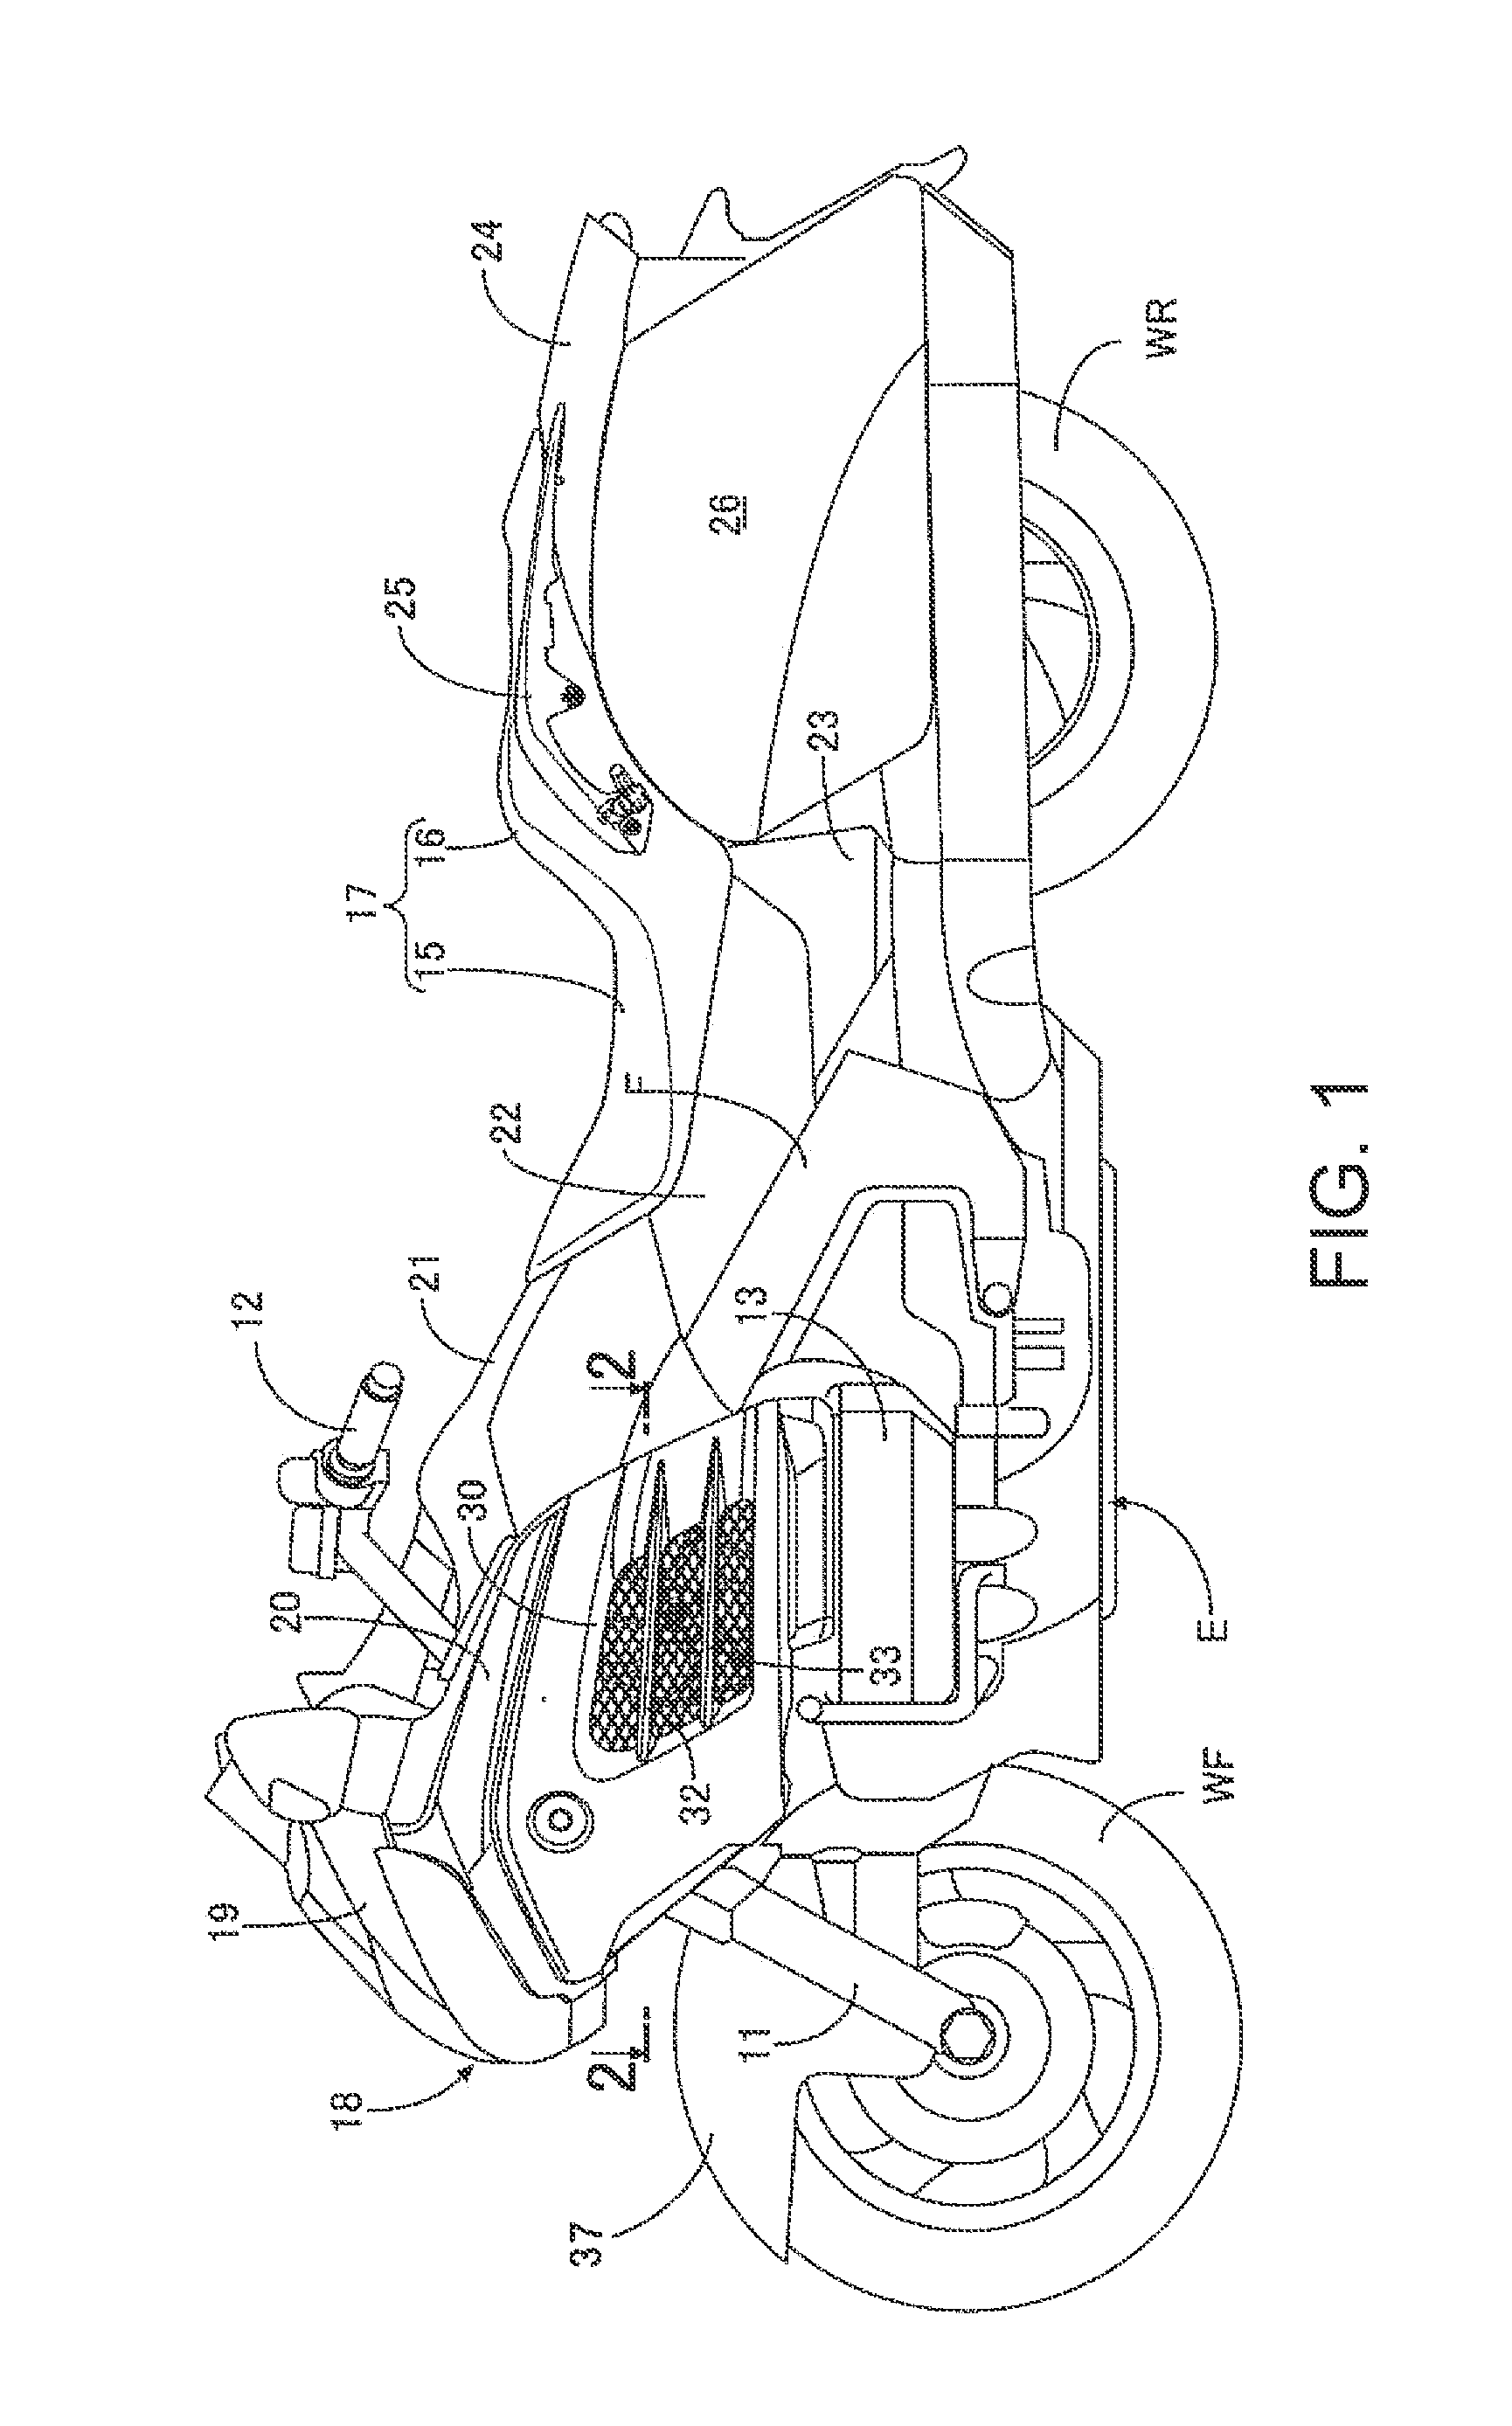 Ventilation structure of radiator in straddle type vehicle